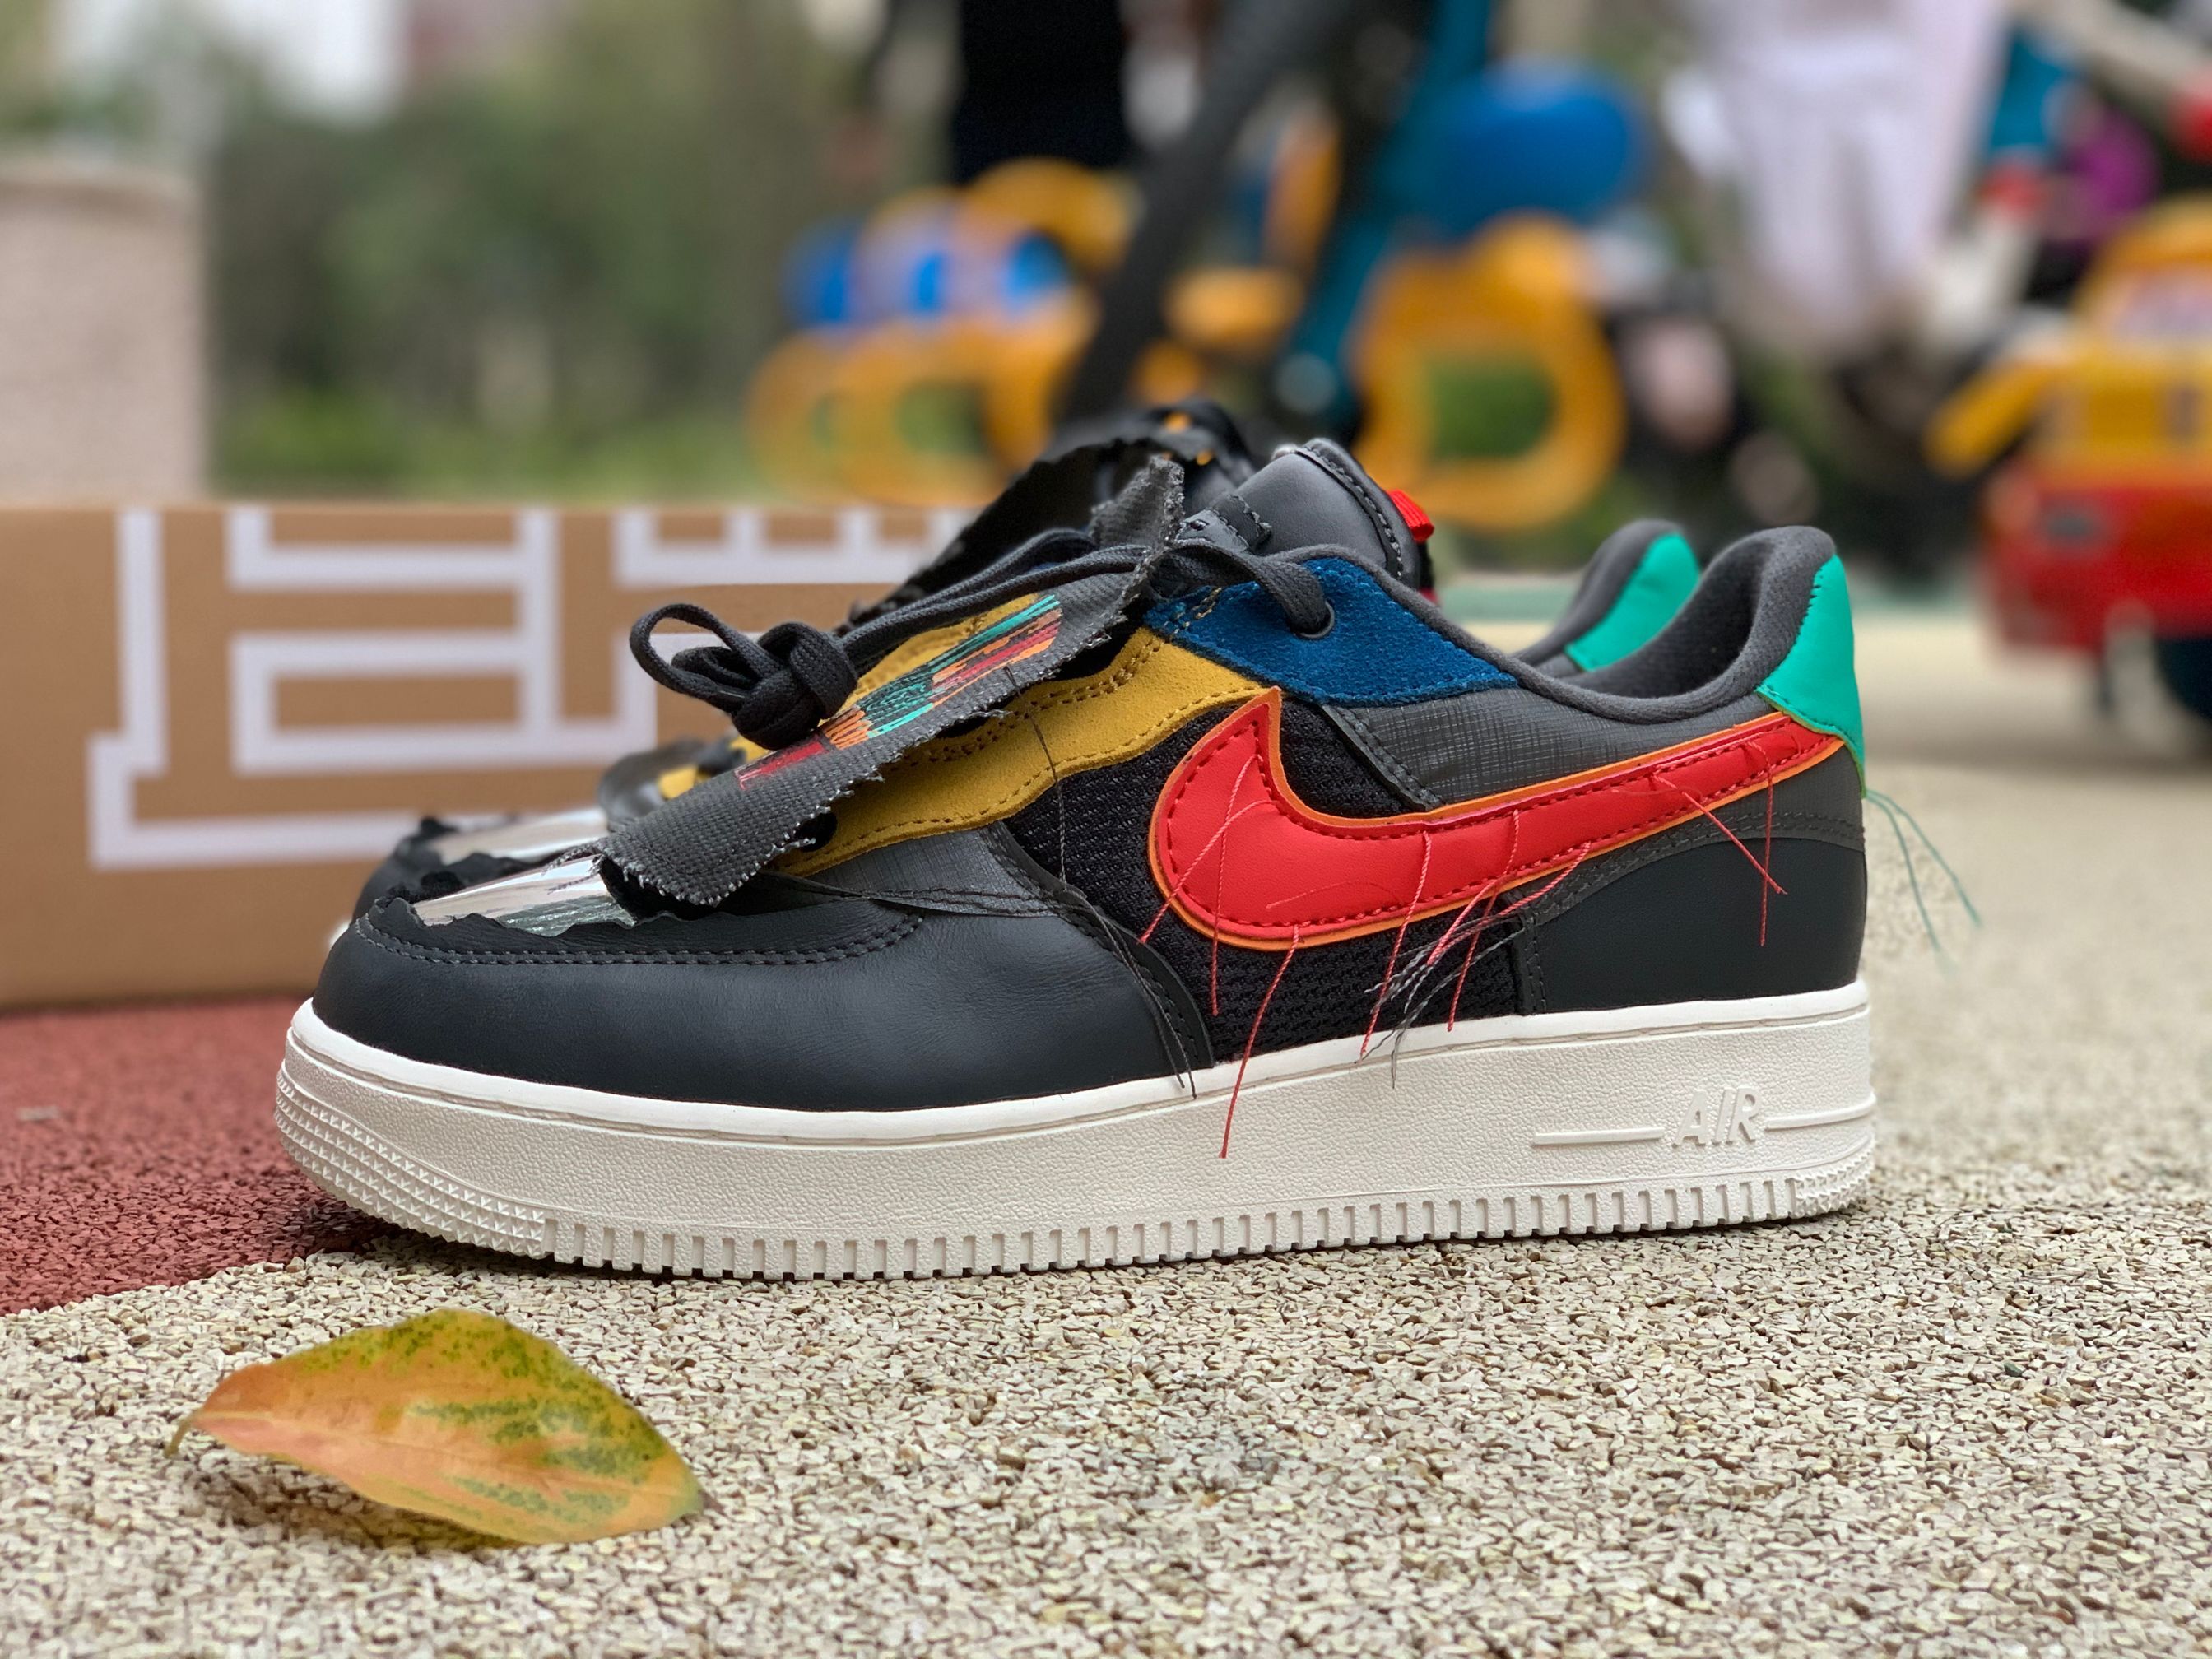 2020 Cheap Nike Air Force 1 Low 'Black History Month' CT5534-001 New ...